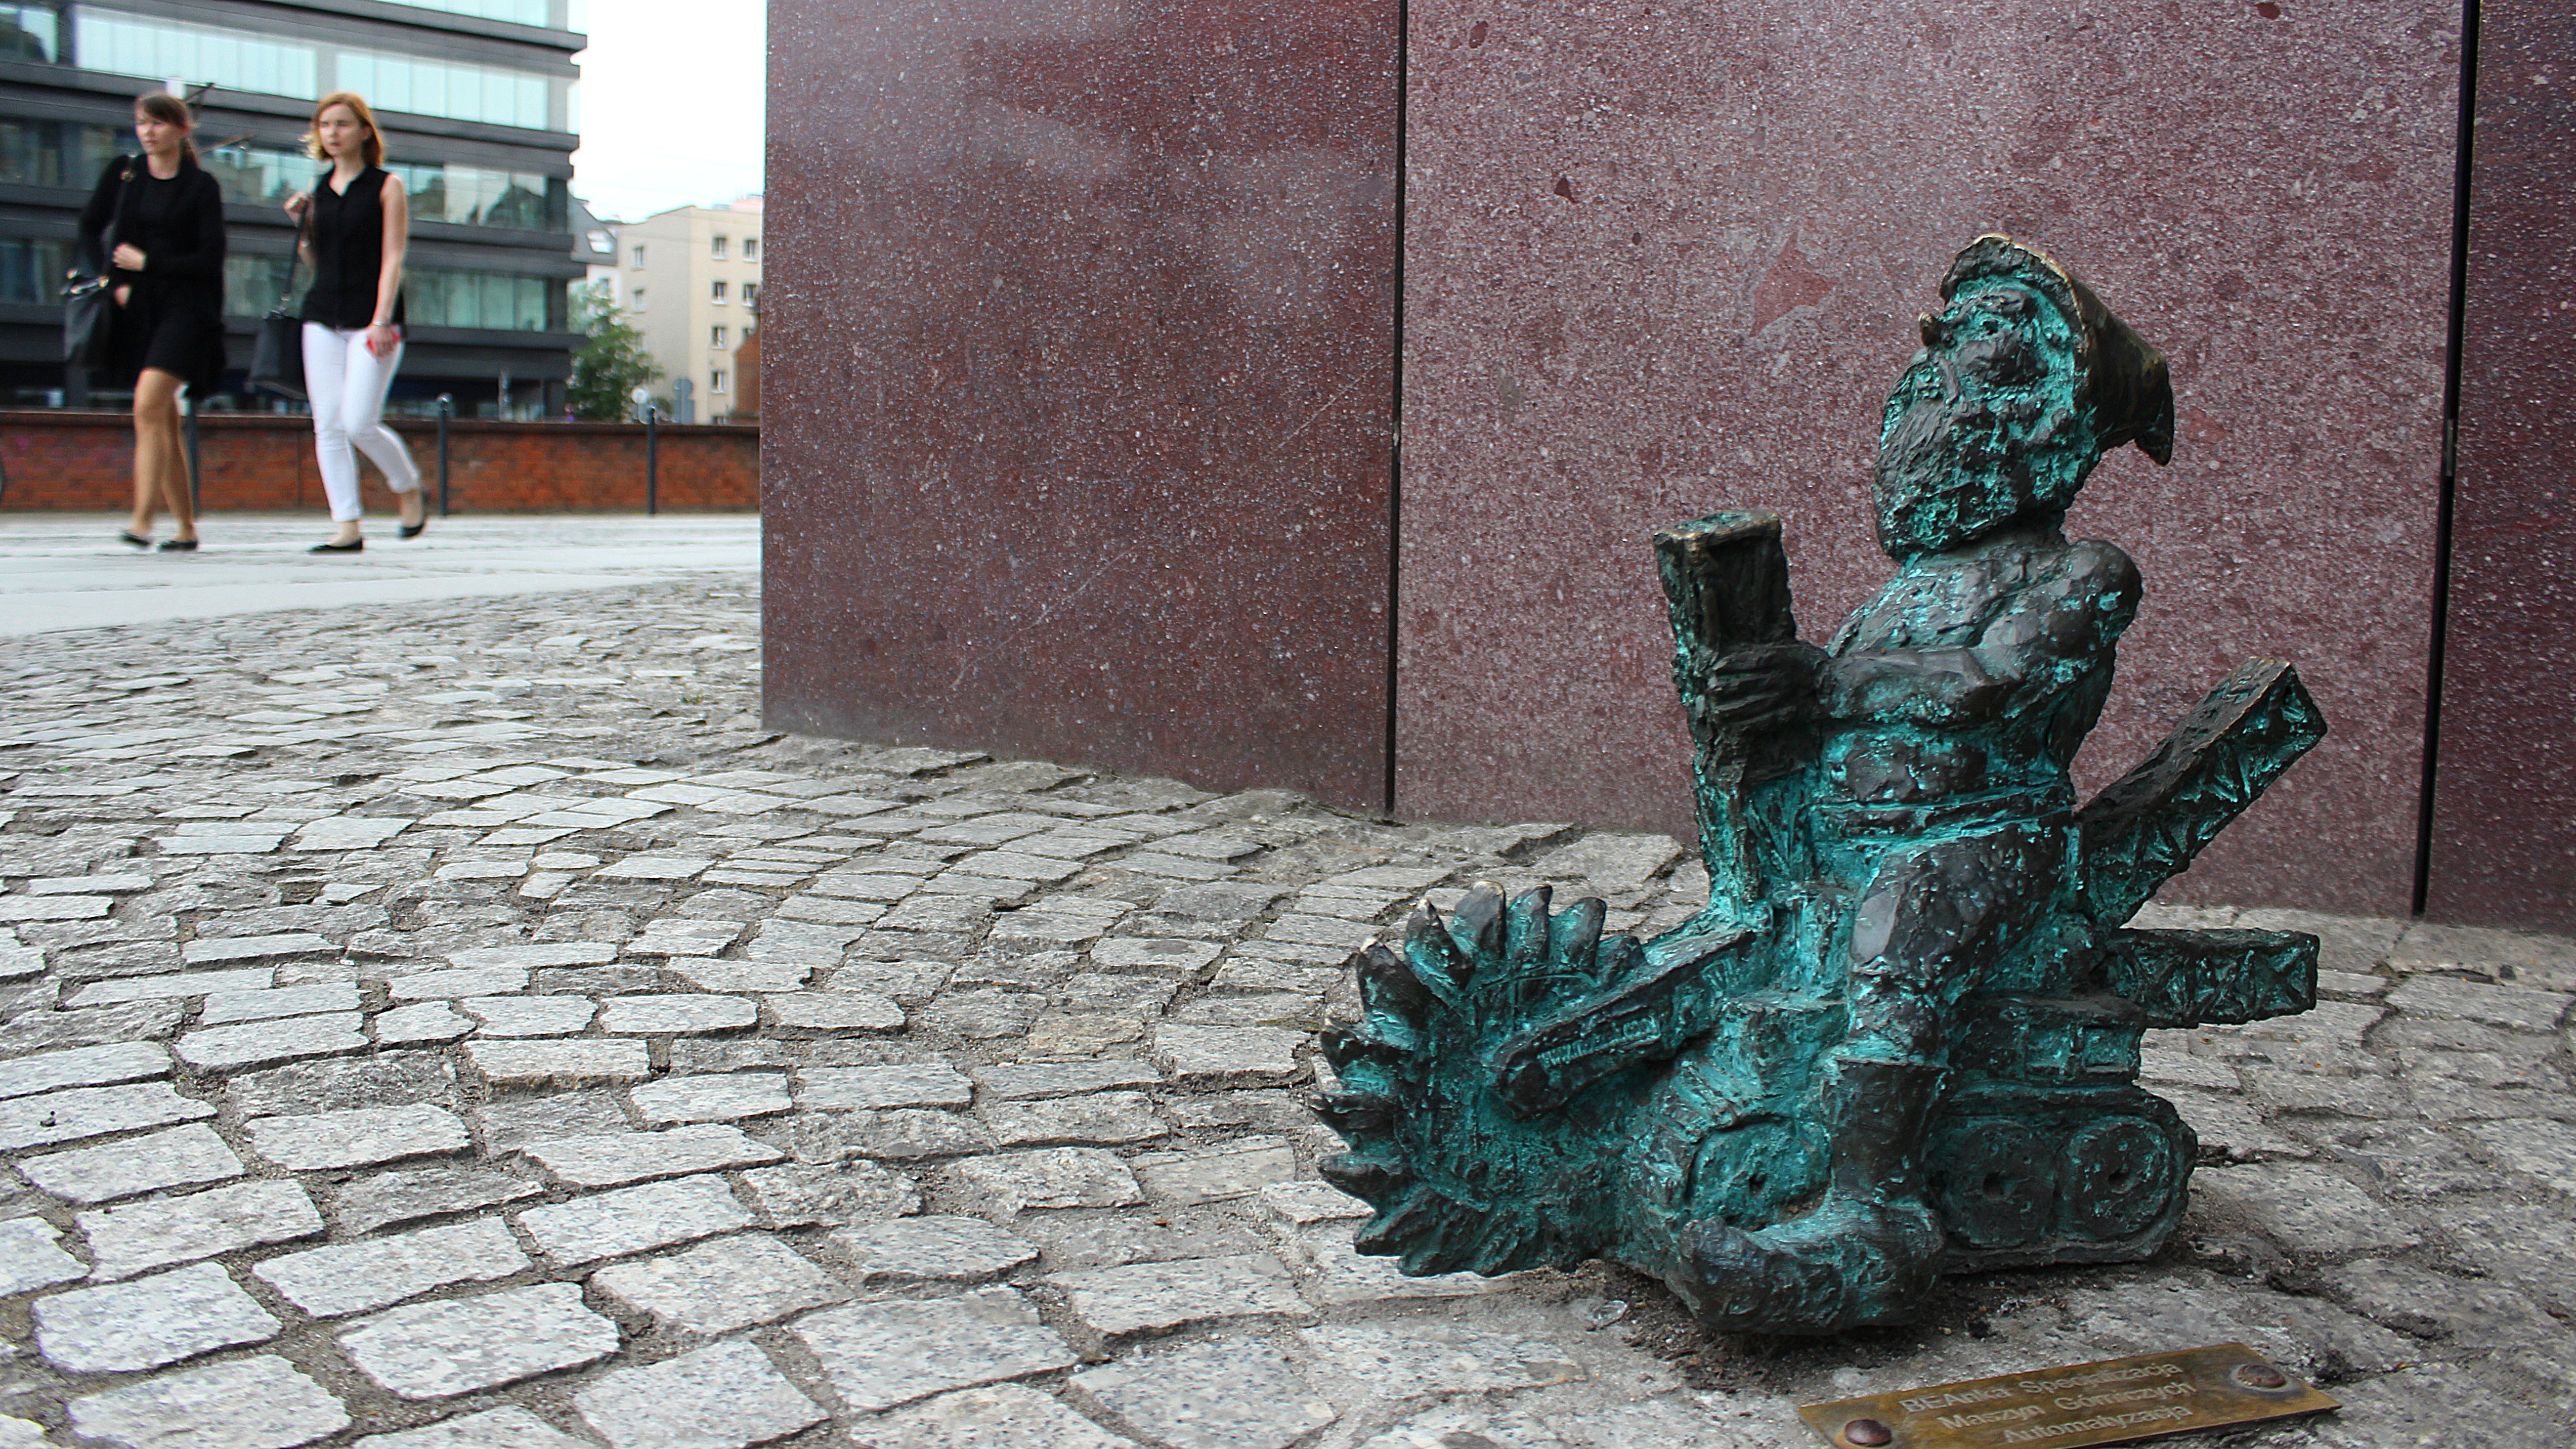 A miniature dwarf statue in Wrocław with a saw blade. One of the many sights I saw during my one week in Poland.